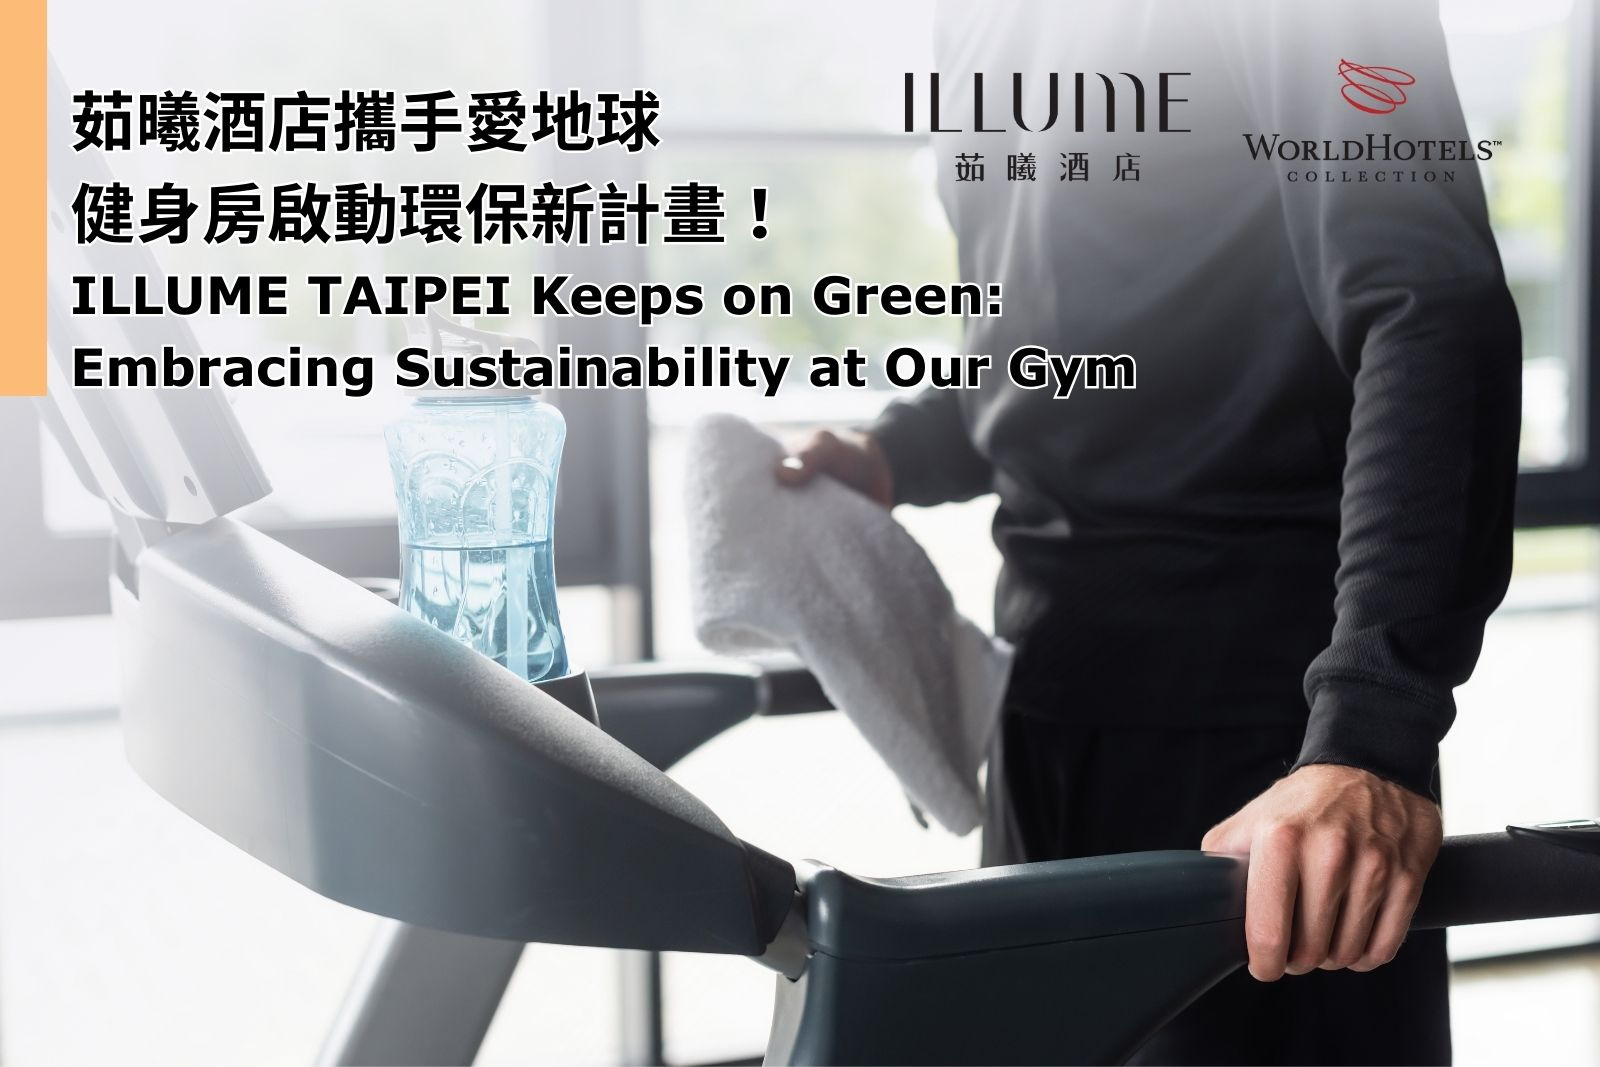 ILLUME TAIPEI Keeps on Green: Embracing Sustainability at Our Gym